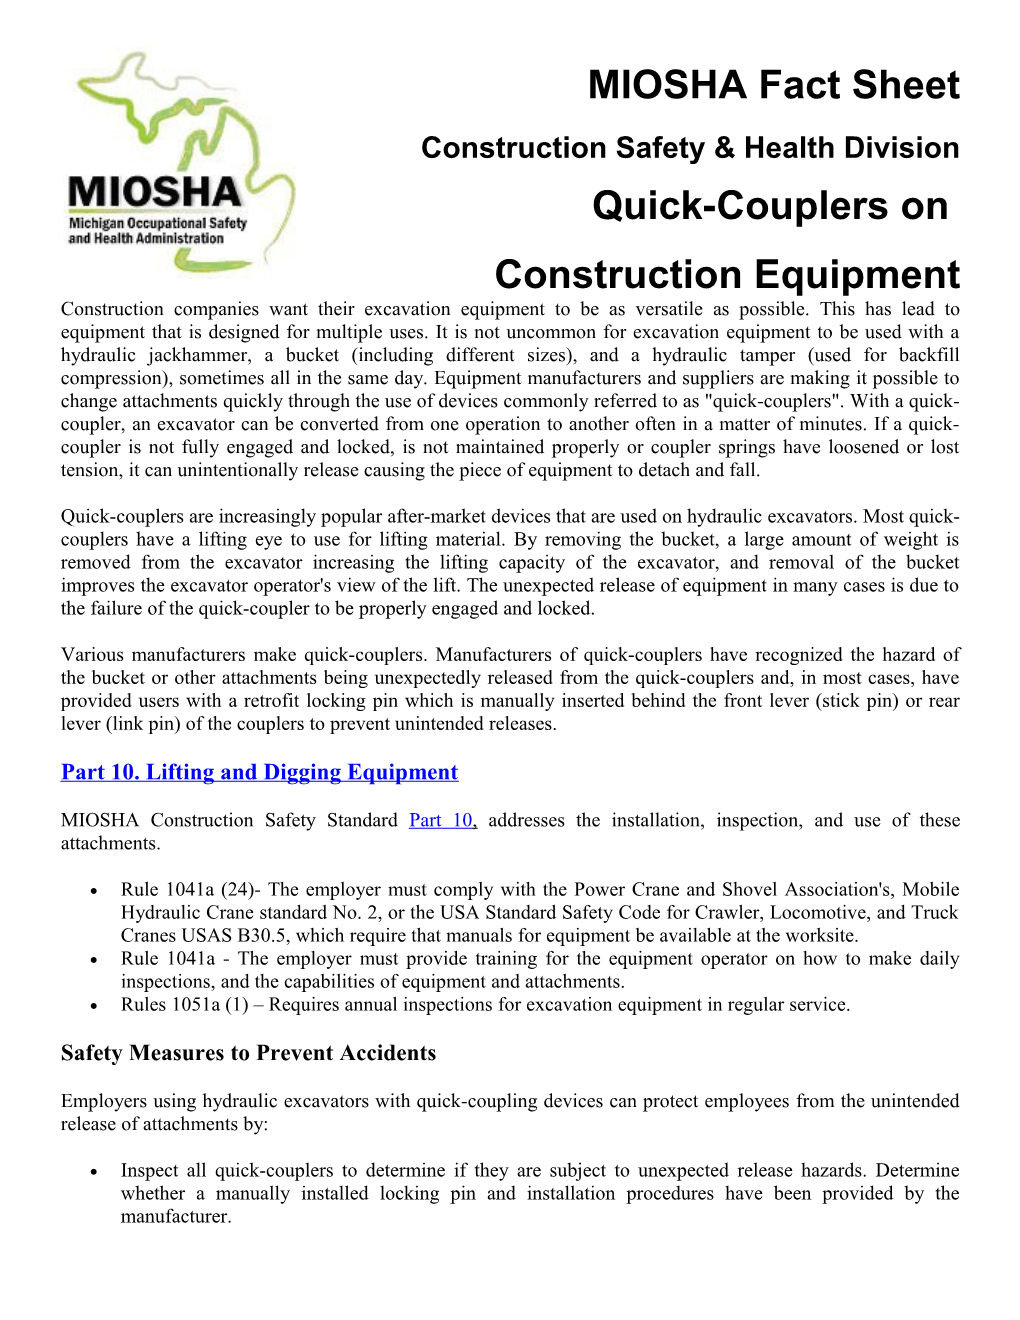 Quick-Couplers on Construction Equipment